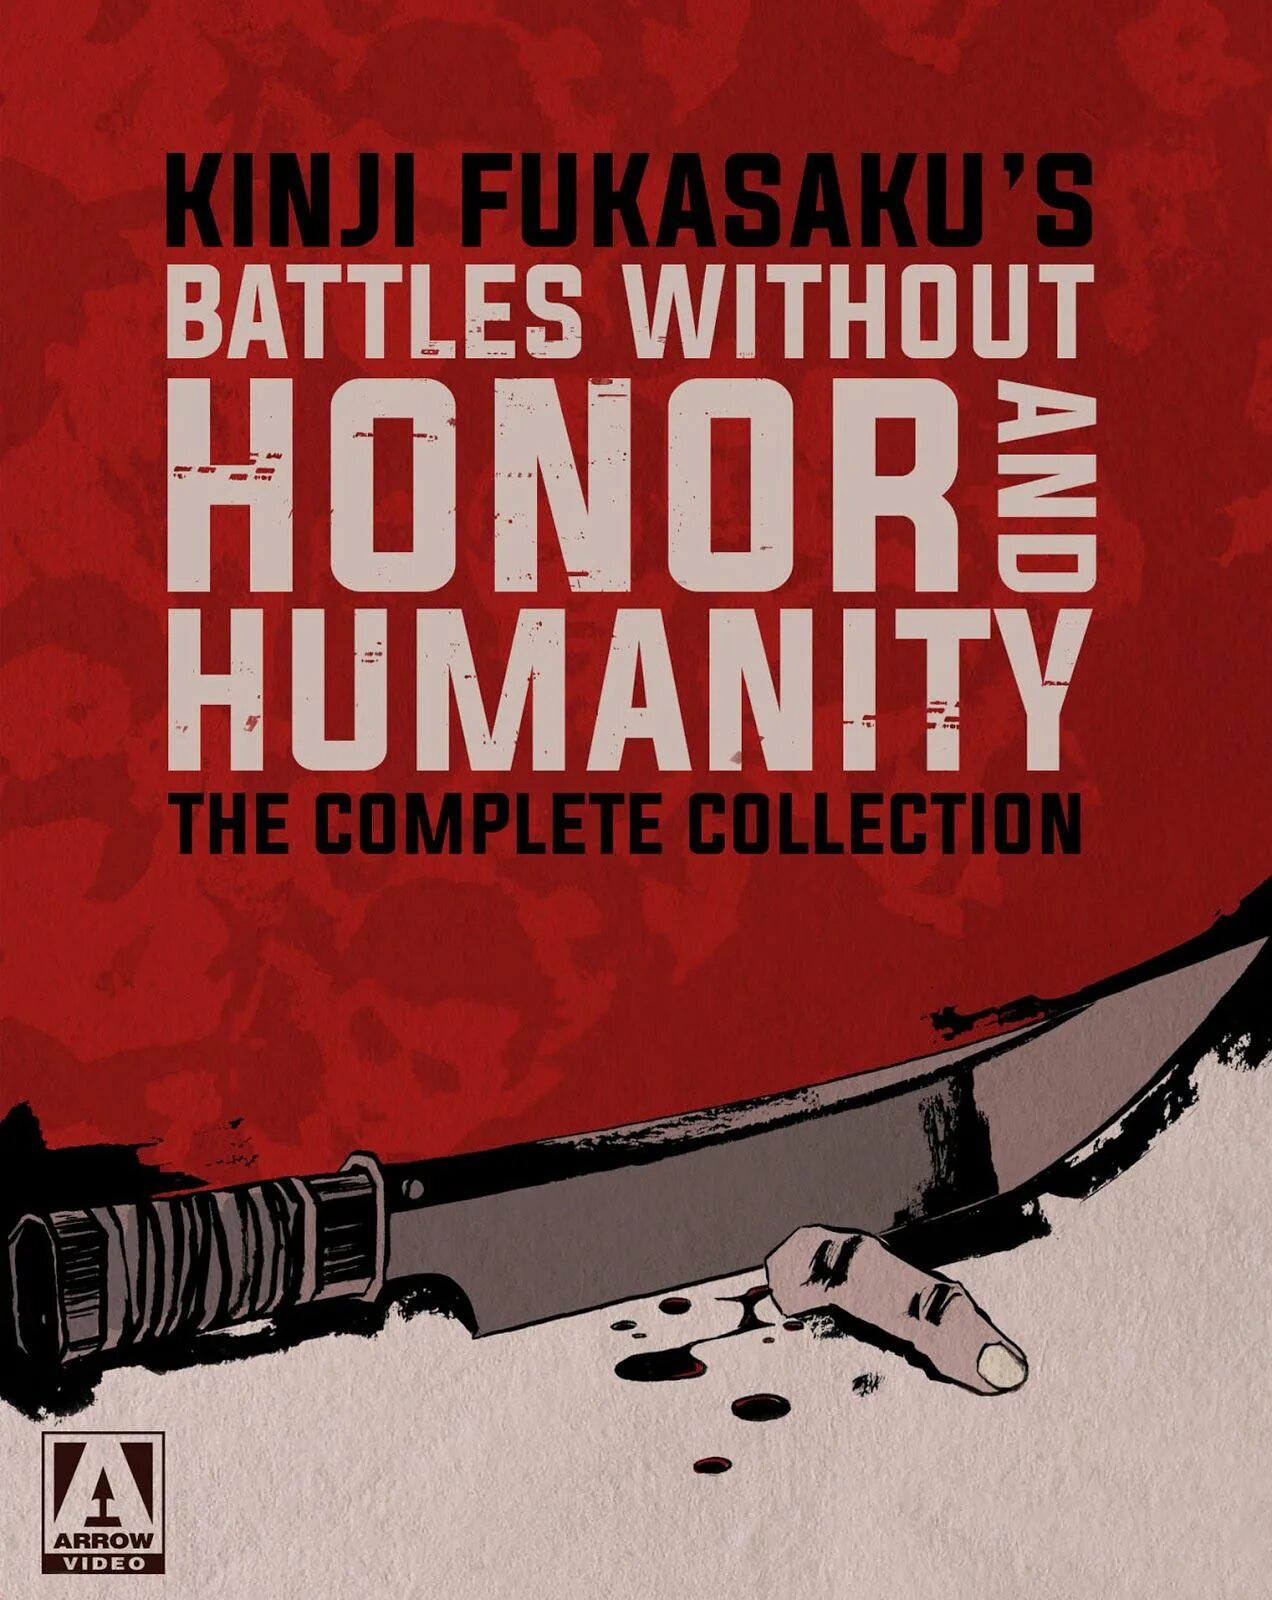 Without honor or humanity. Battle without Honor or Humanity. Битвы без чести и жалости. Battle without Honor. Jingi Naki Tatakai: Dairi Sensô.